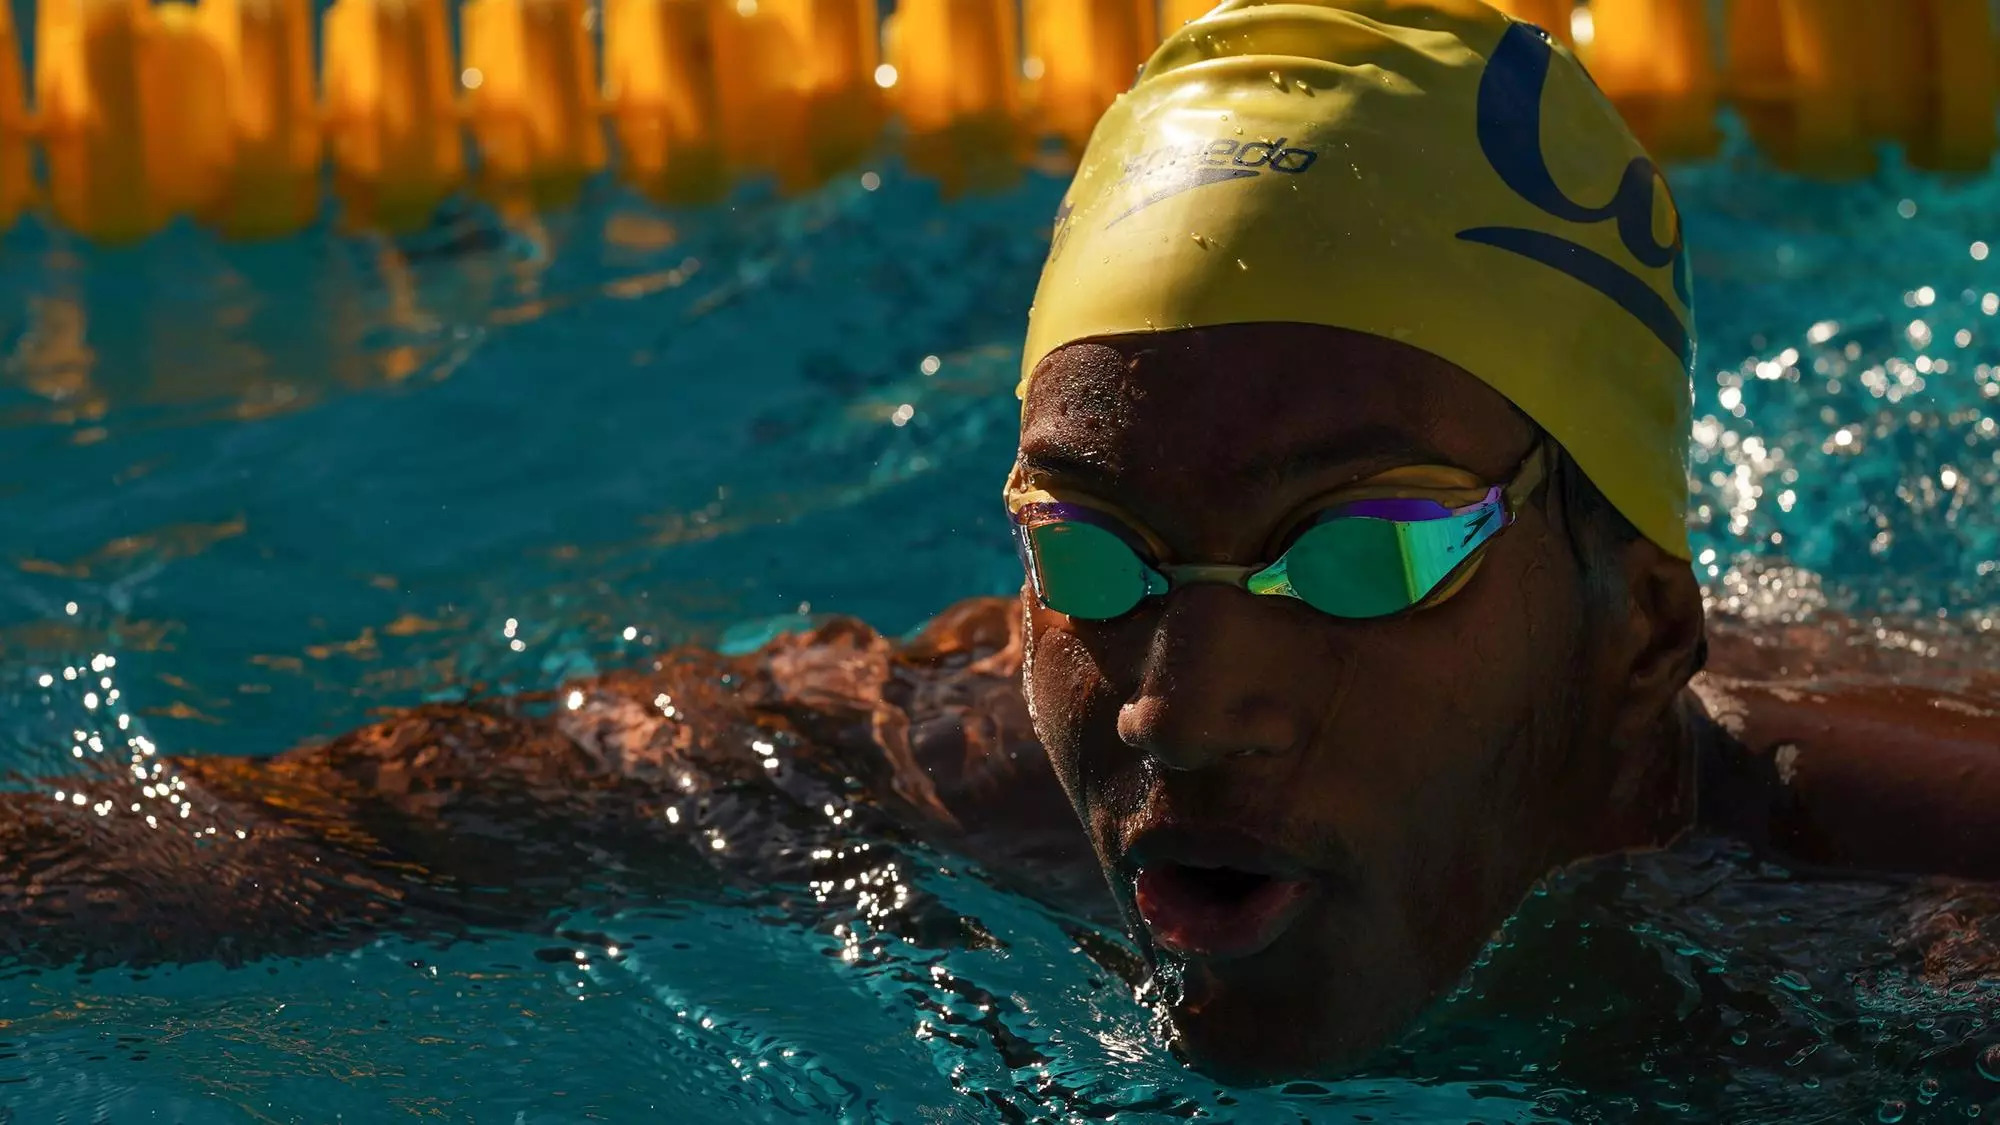 Young Black man mid-swim in a Cal swim cap with goggles